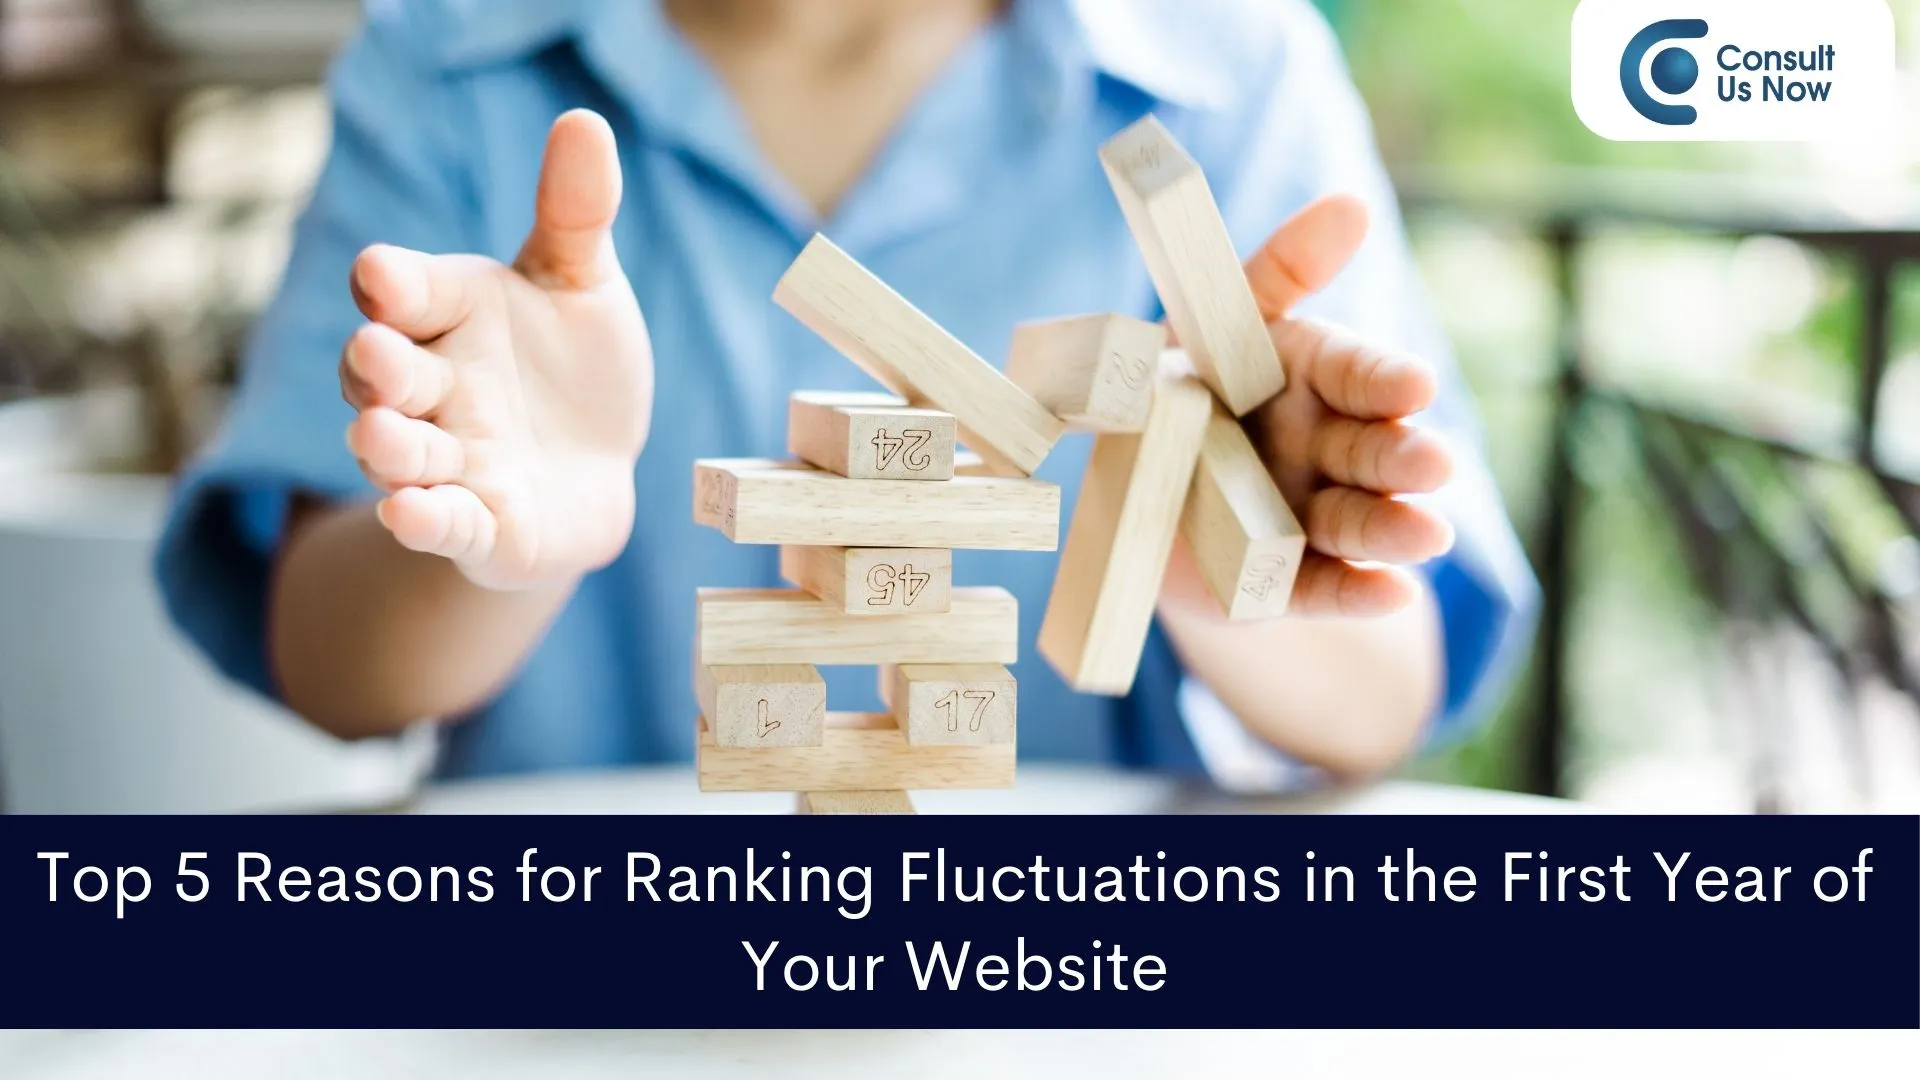 Ranking fluctuation of websites